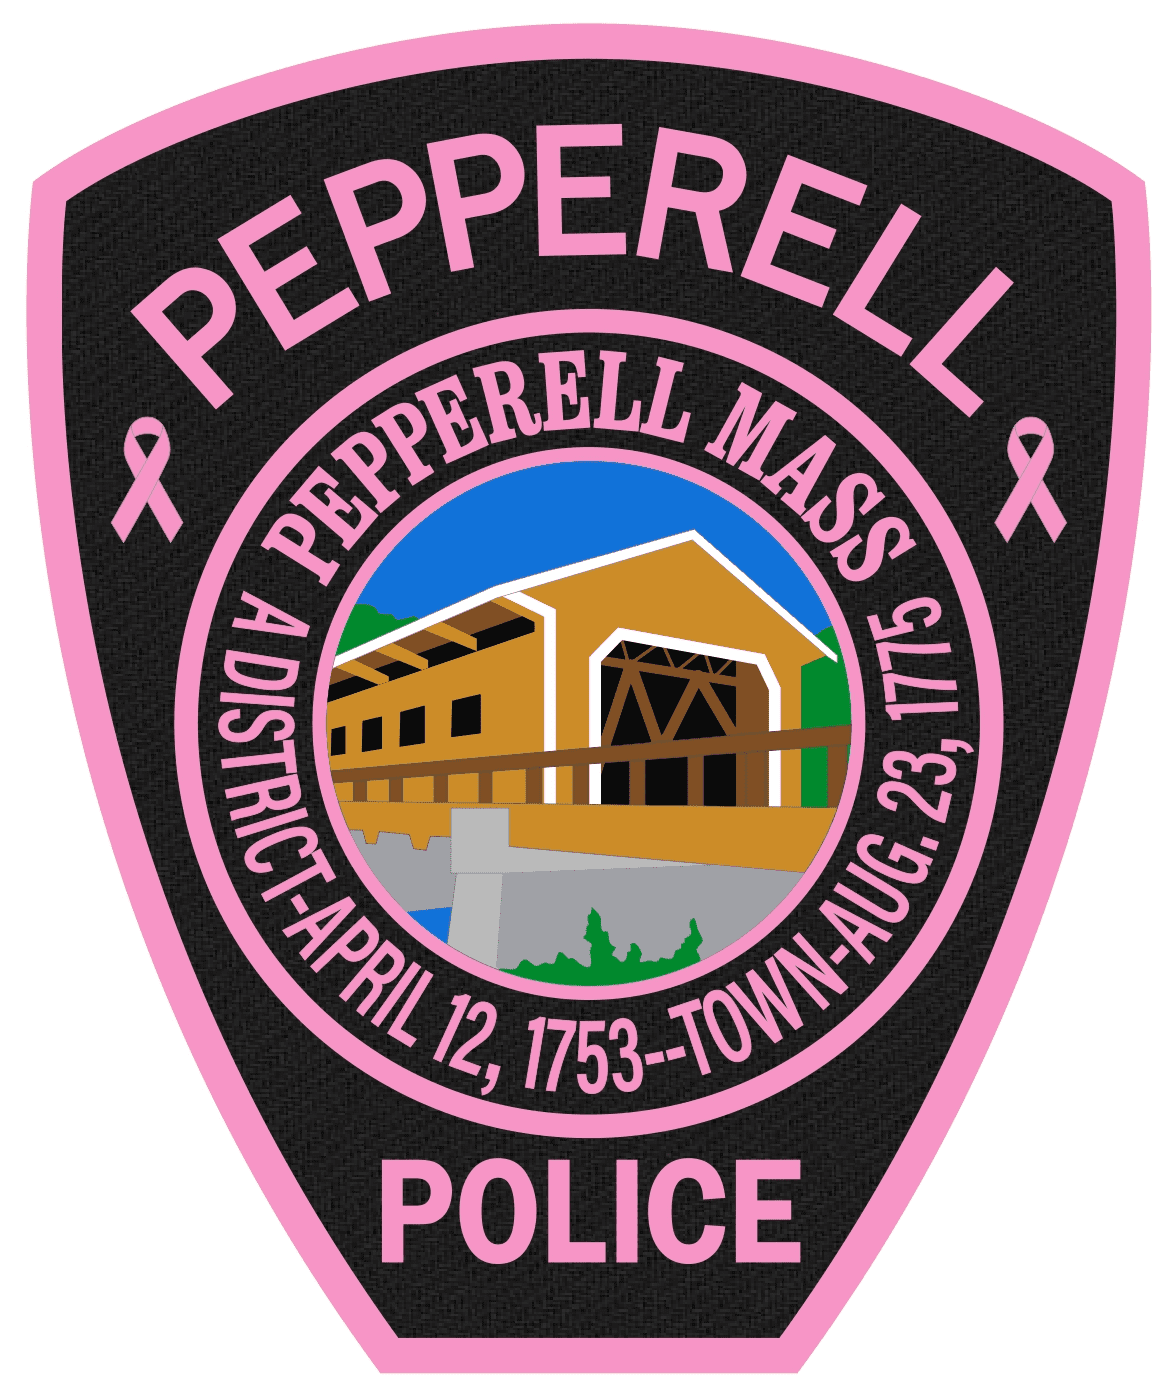 Pepperell MA Police Department